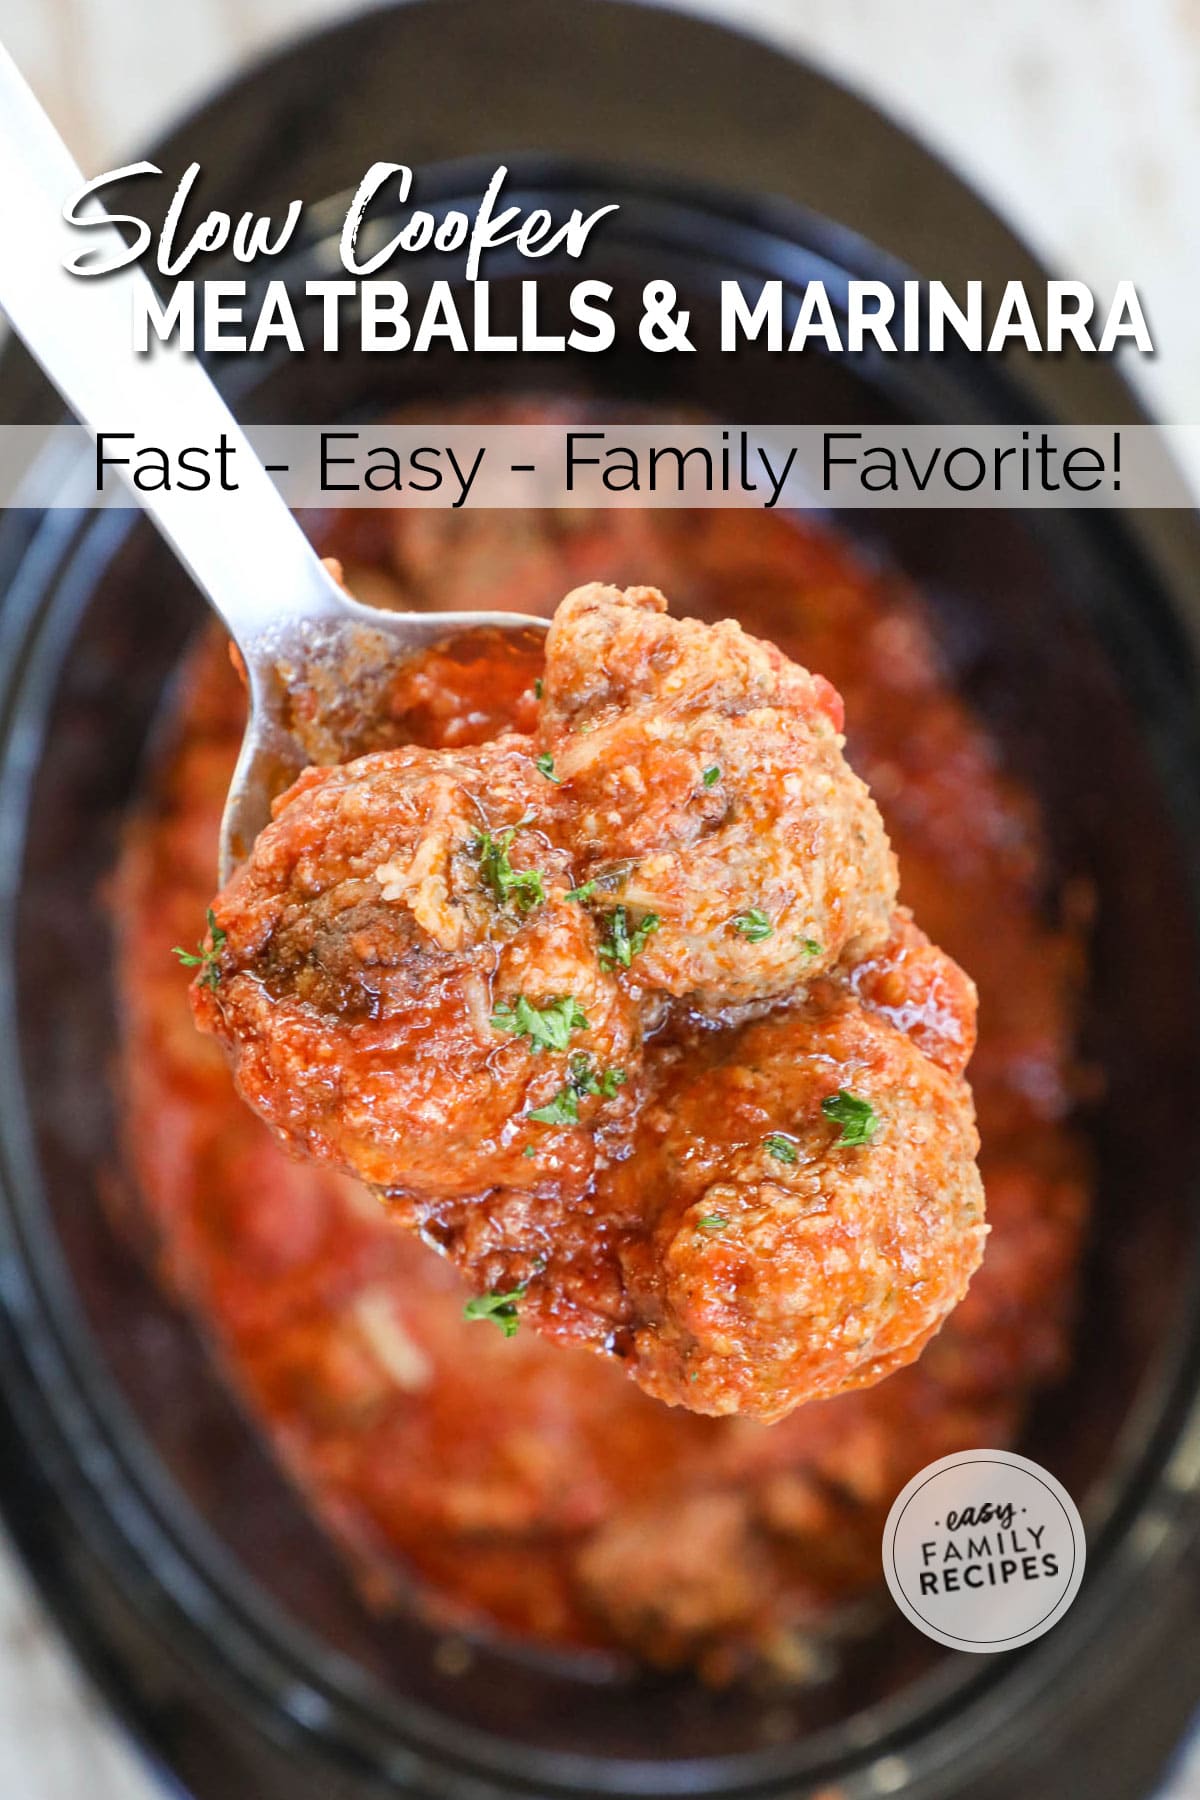 ifting 3 beef Italian Meatballs in marinara out of the crock pot